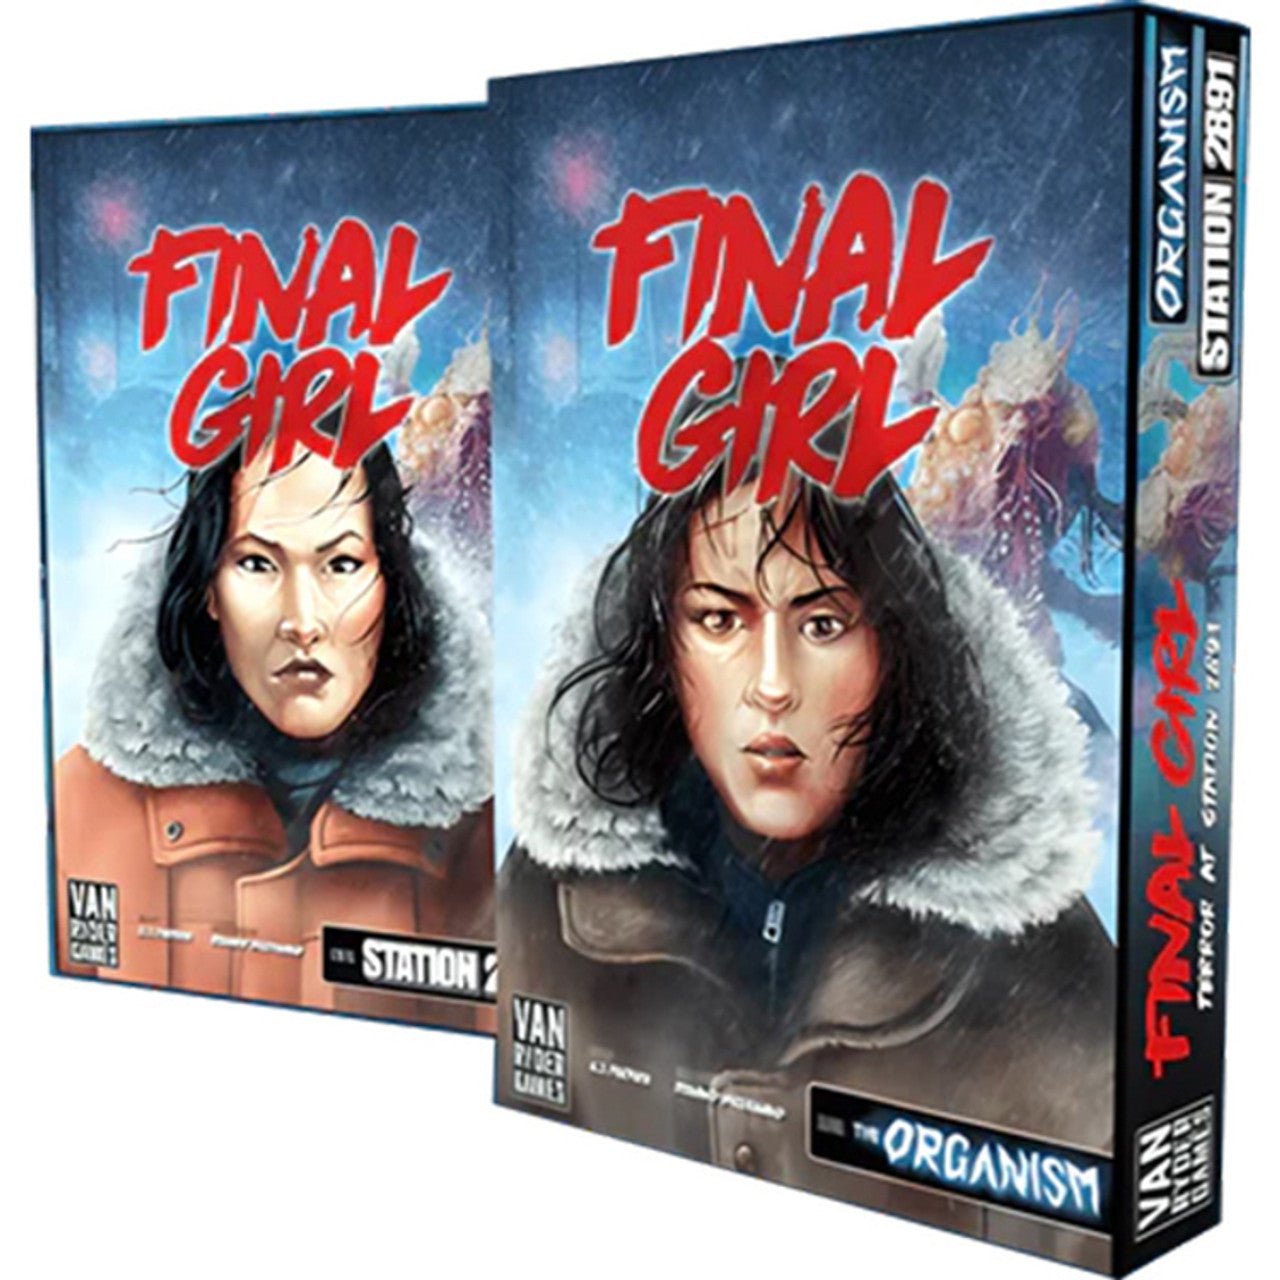 Final Girl: Series 2 - Panic at Station 2891 Feature Film Expansion in Board Games at The Compleat Strategist